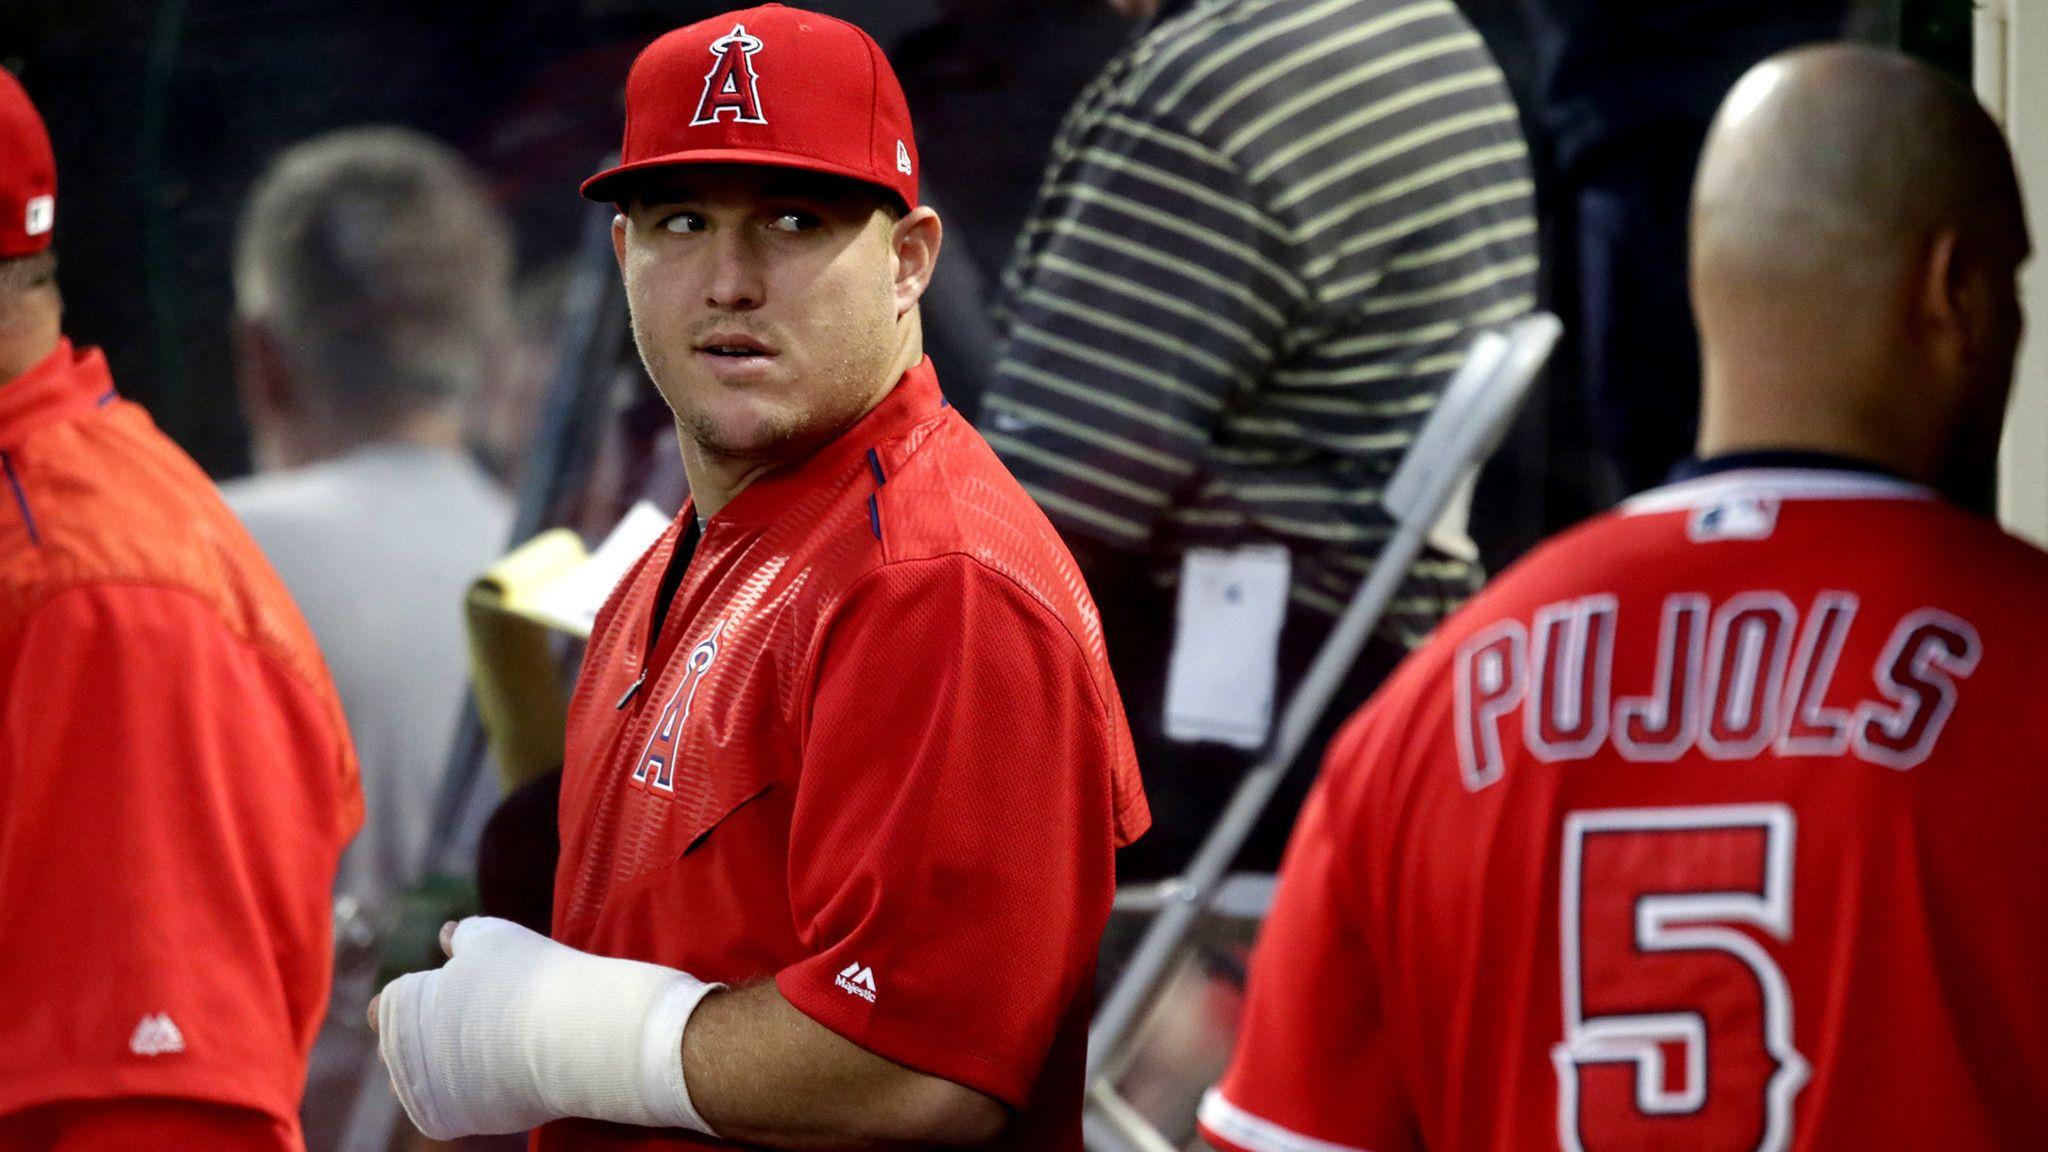 Mike Trout gets ready for rest and rehabilitation after surgery